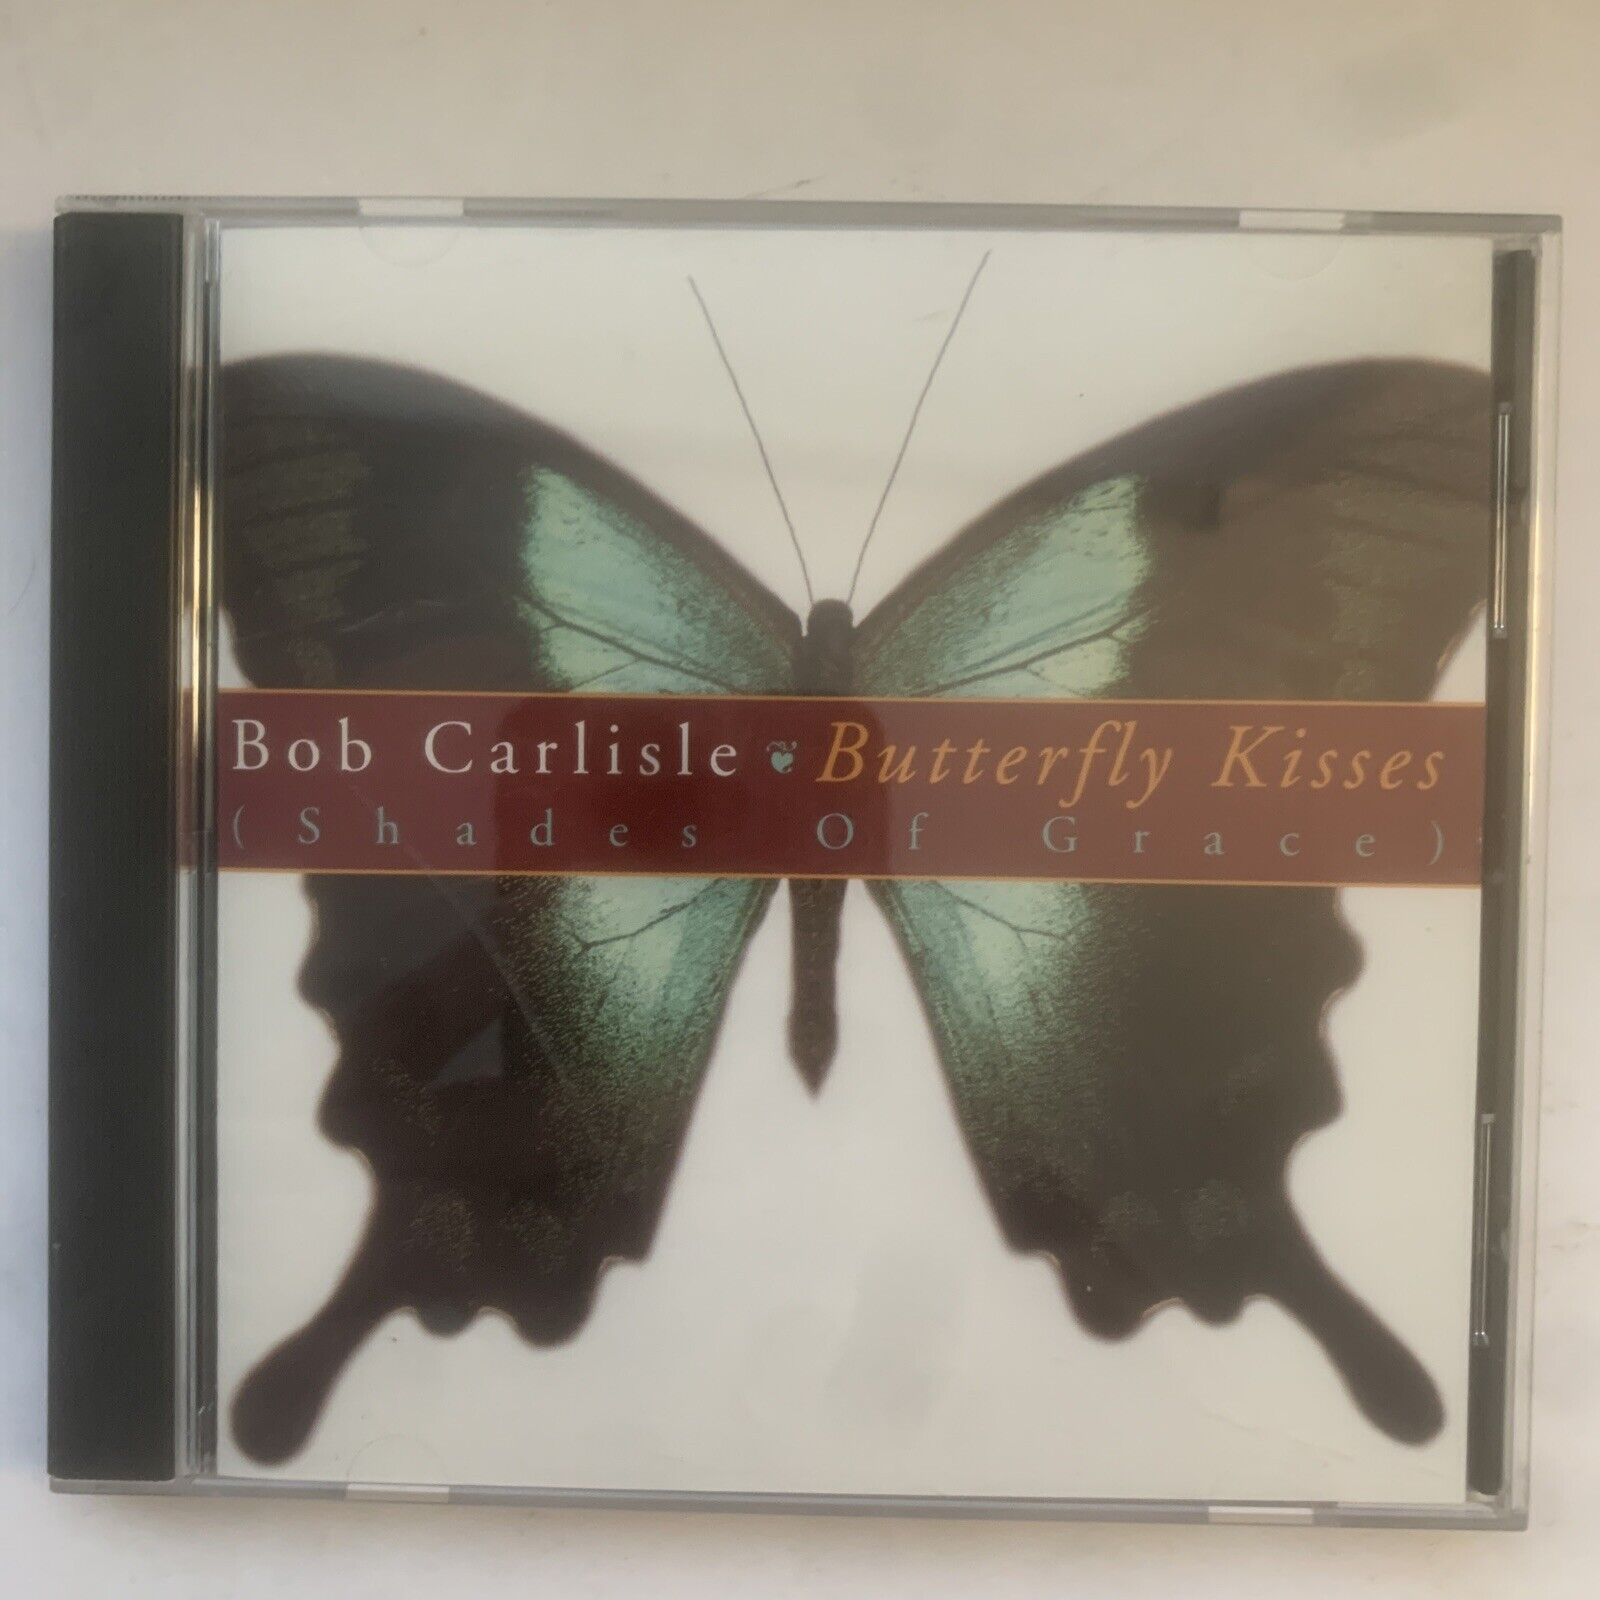 Bob Carlisle Butteryfly Kisses (Shades of Grace) CD 1997 - TESTED WORKS